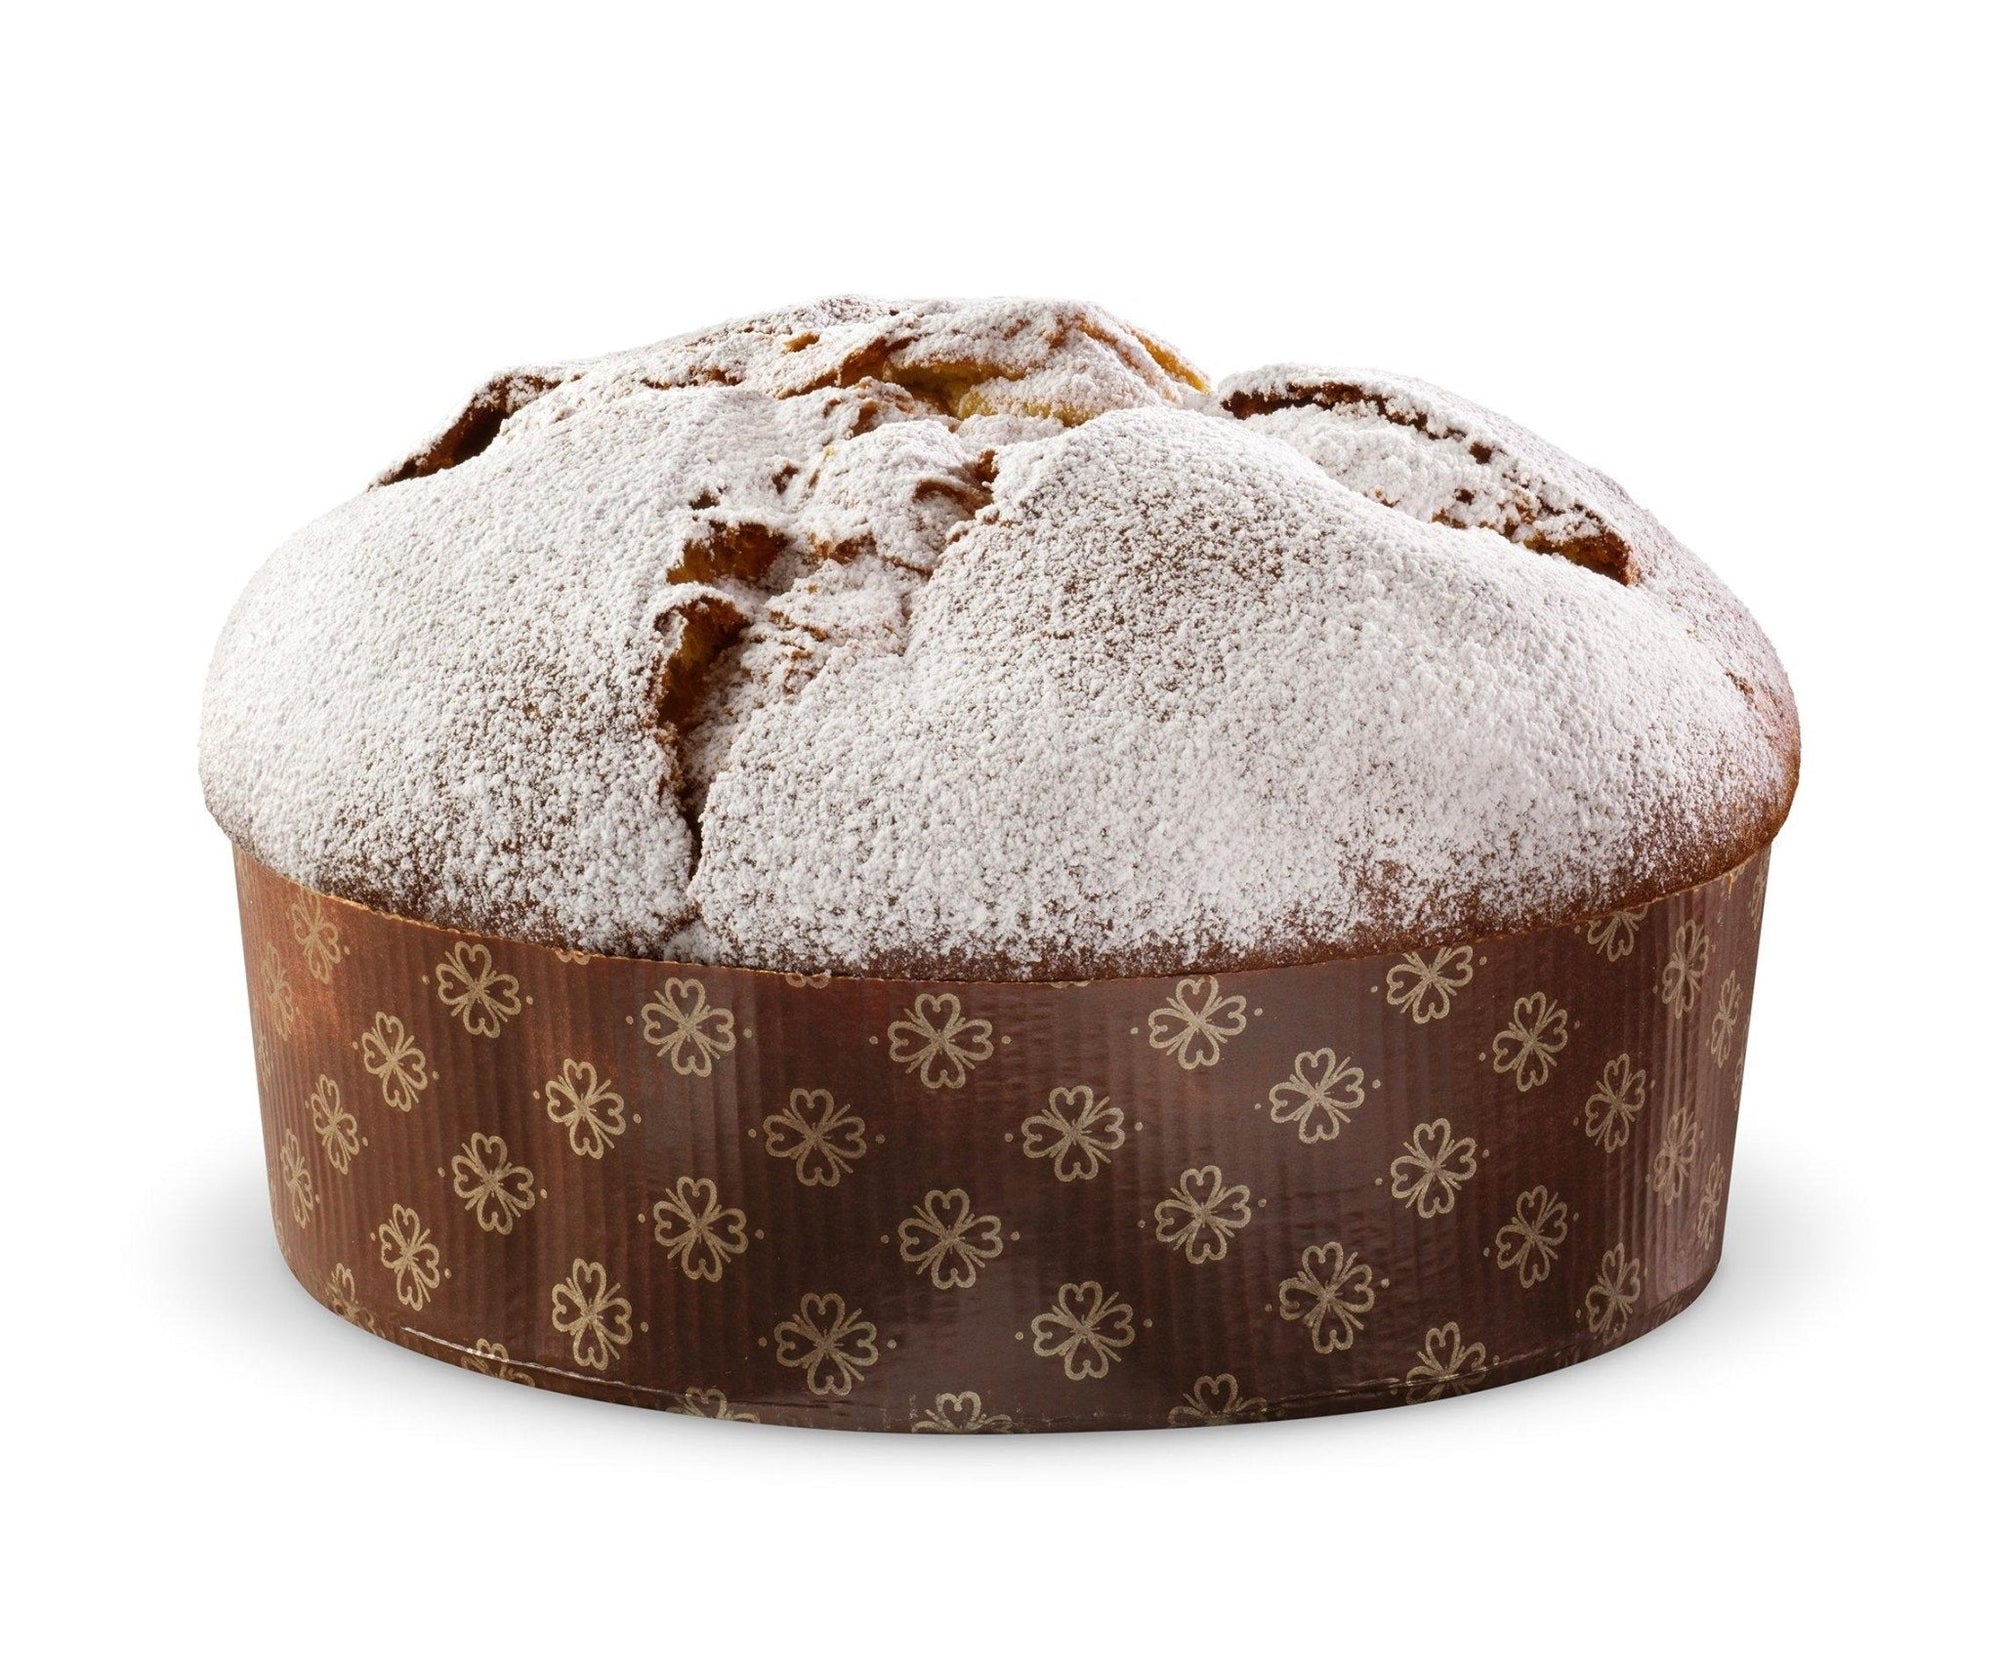 Panettone Paradiso 750g - BLACK FRIDAY - Galup® Store Ufficiale